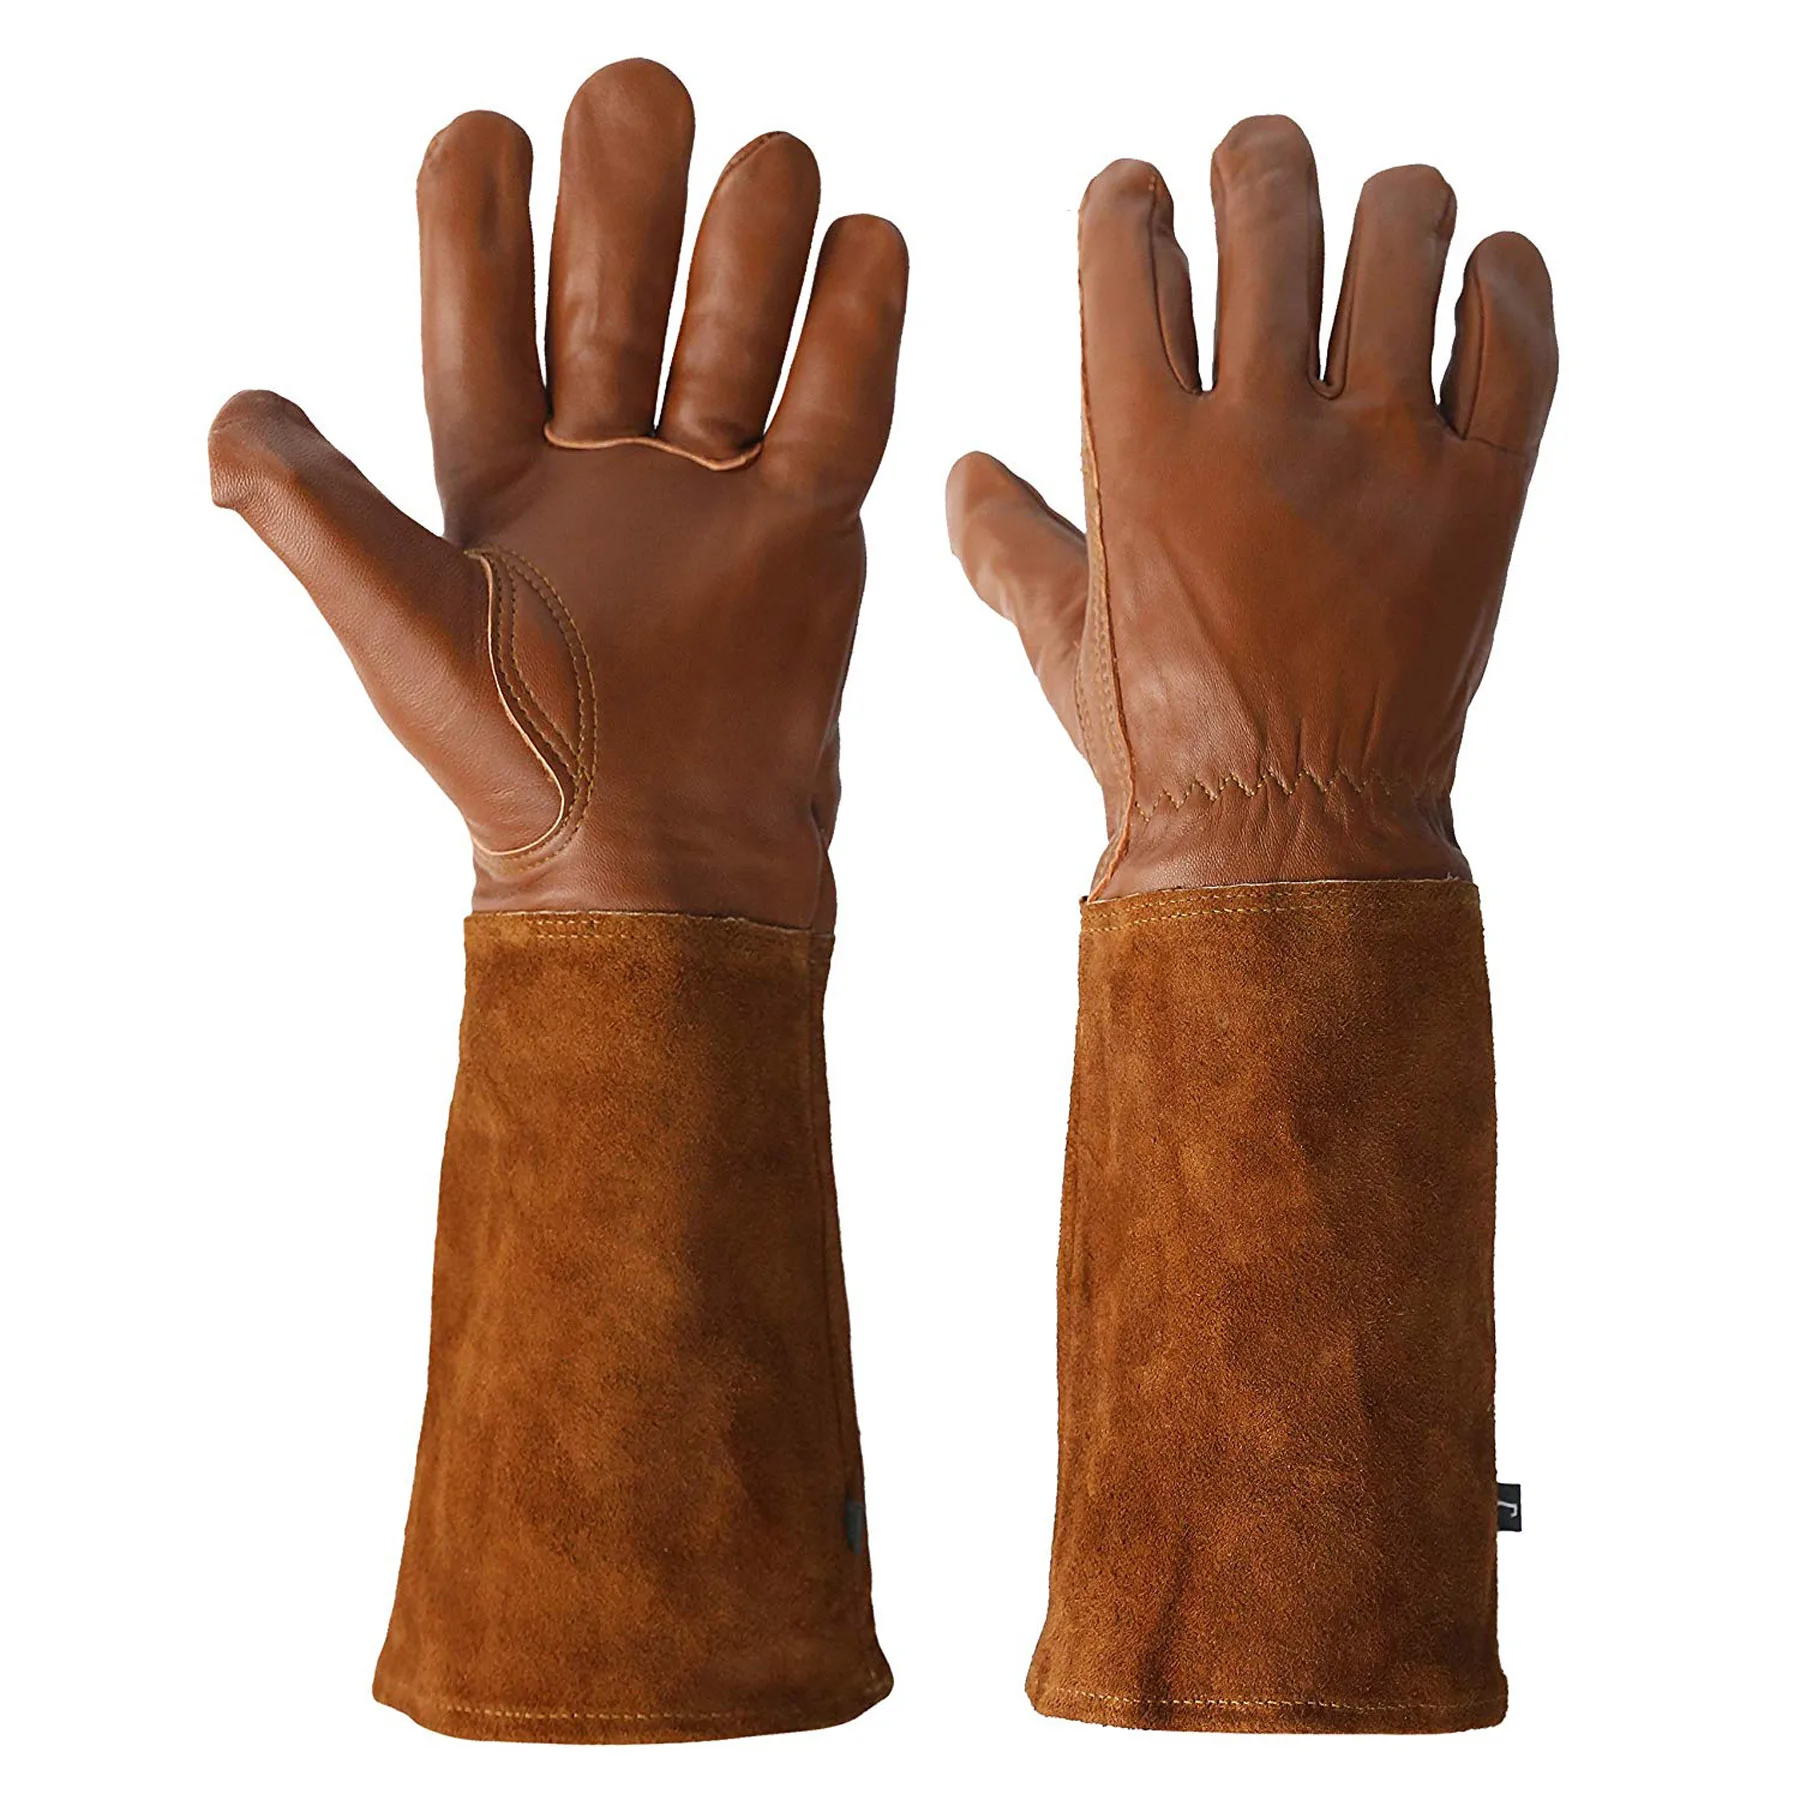 

KIM YUAN 1Pair Cowhide BBQ Baking Insulation Microwave Oven Welding Outdoor BBQ Grill Gloves